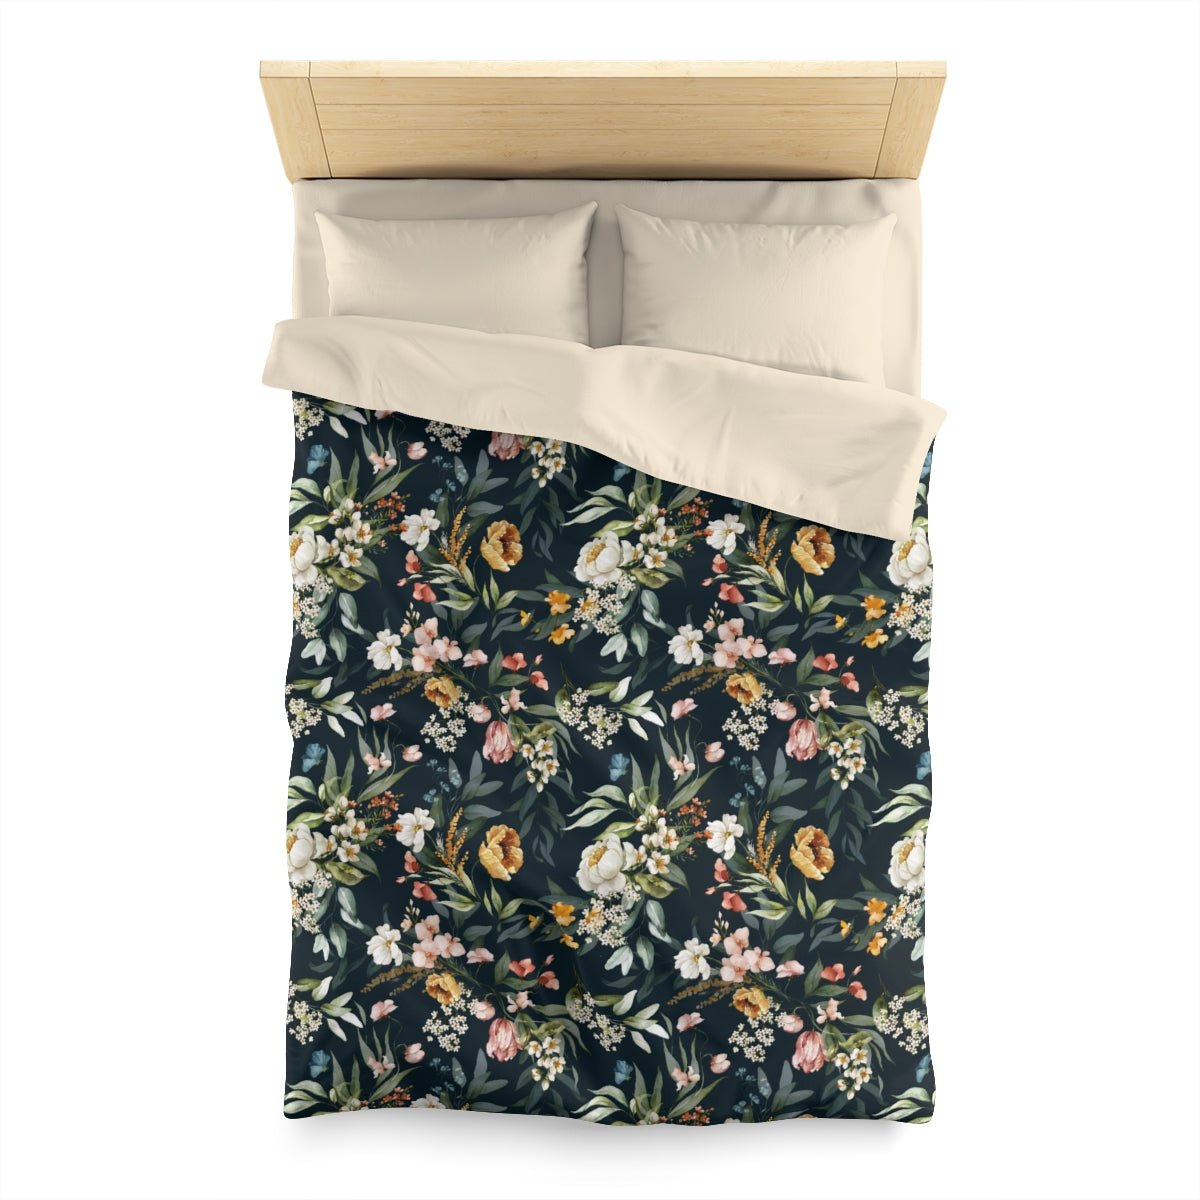 Watercolor Flowers Microfiber Duvet Cover - Puffin Lime